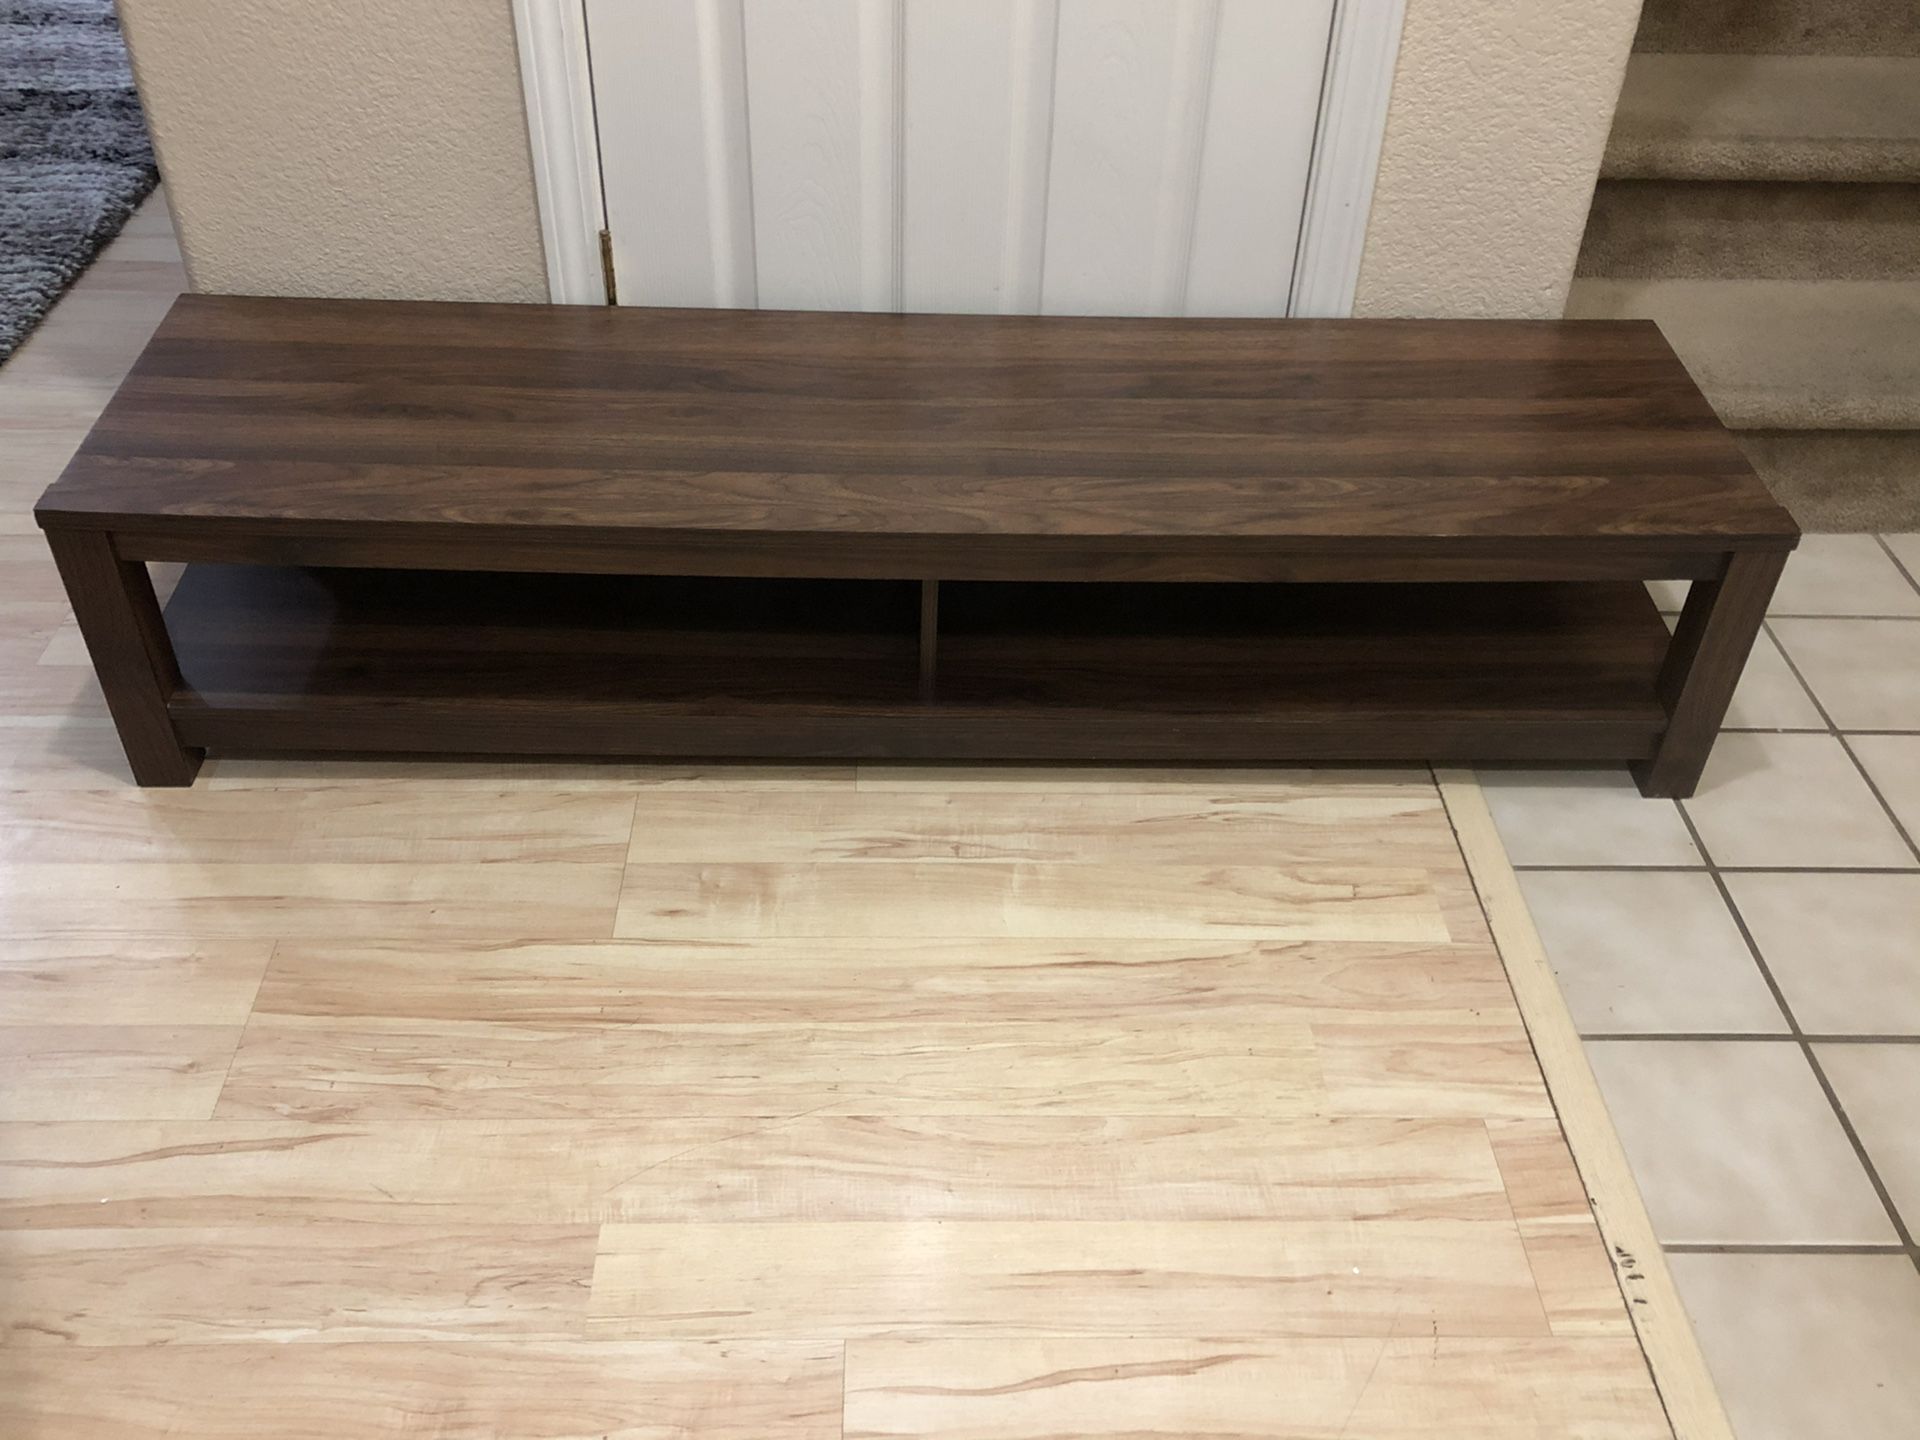 Brand New Low TV Stand Console Table Brown Wood Entertainment Center